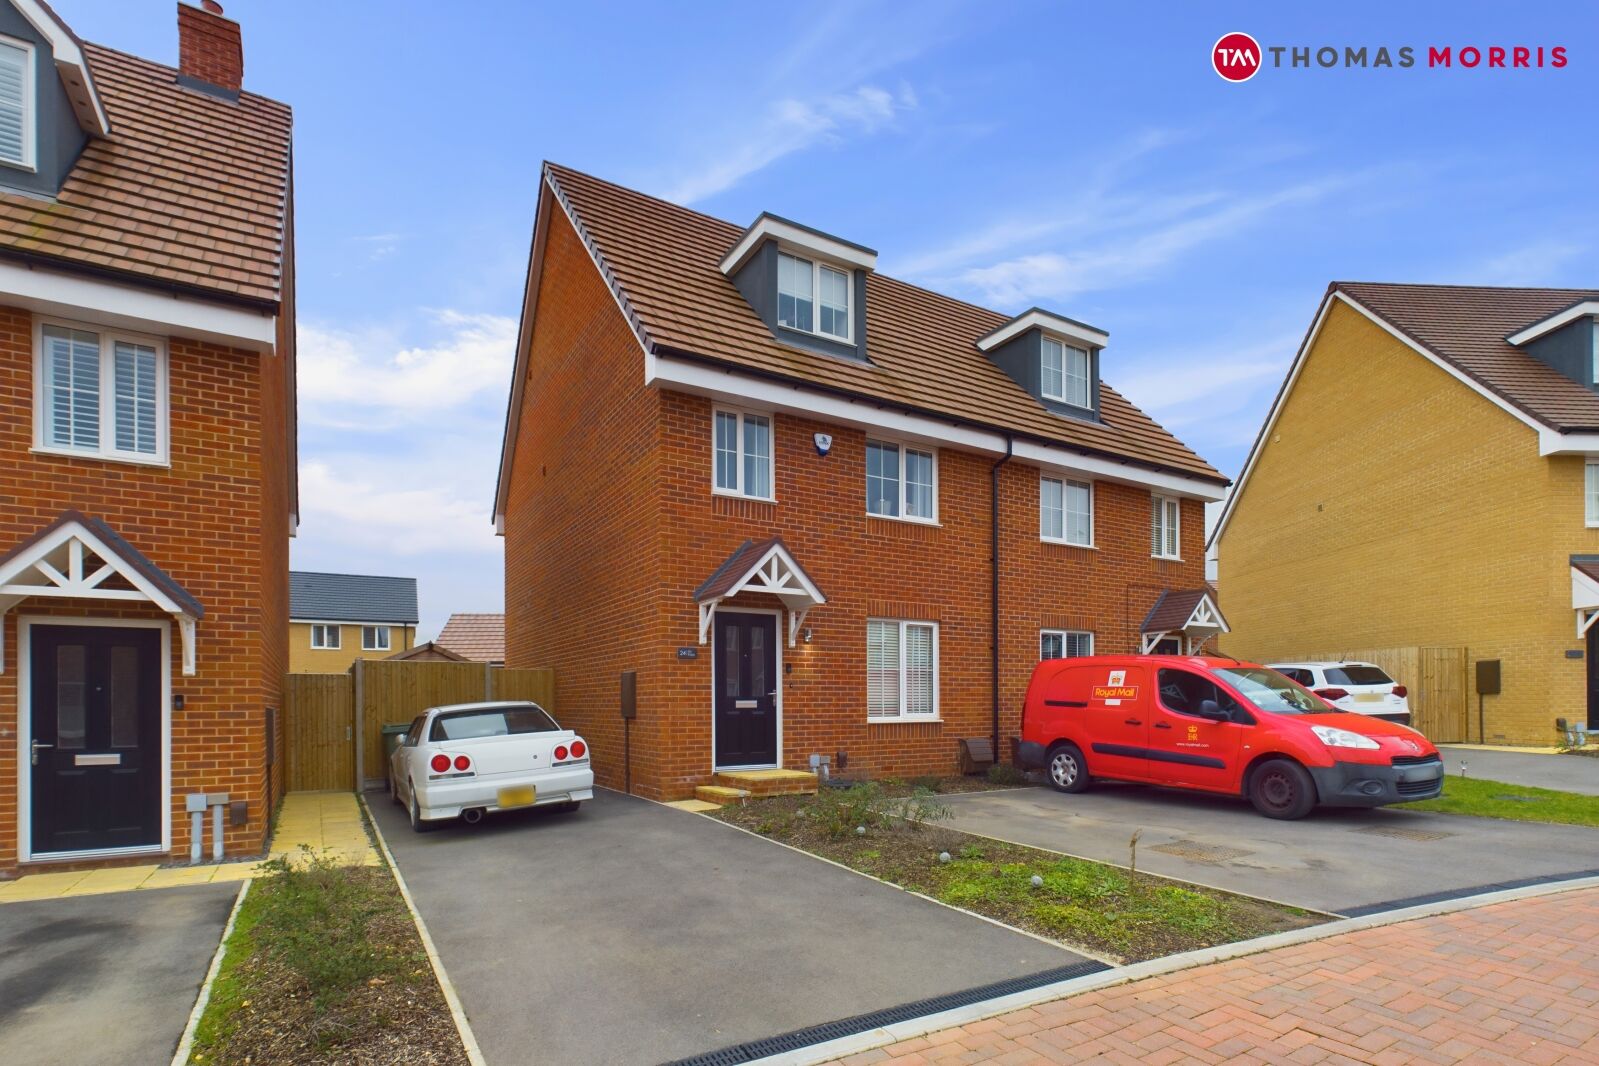 4 bedroom semi detached house for sale Lily Edge, Biggleswade, SG18, main image